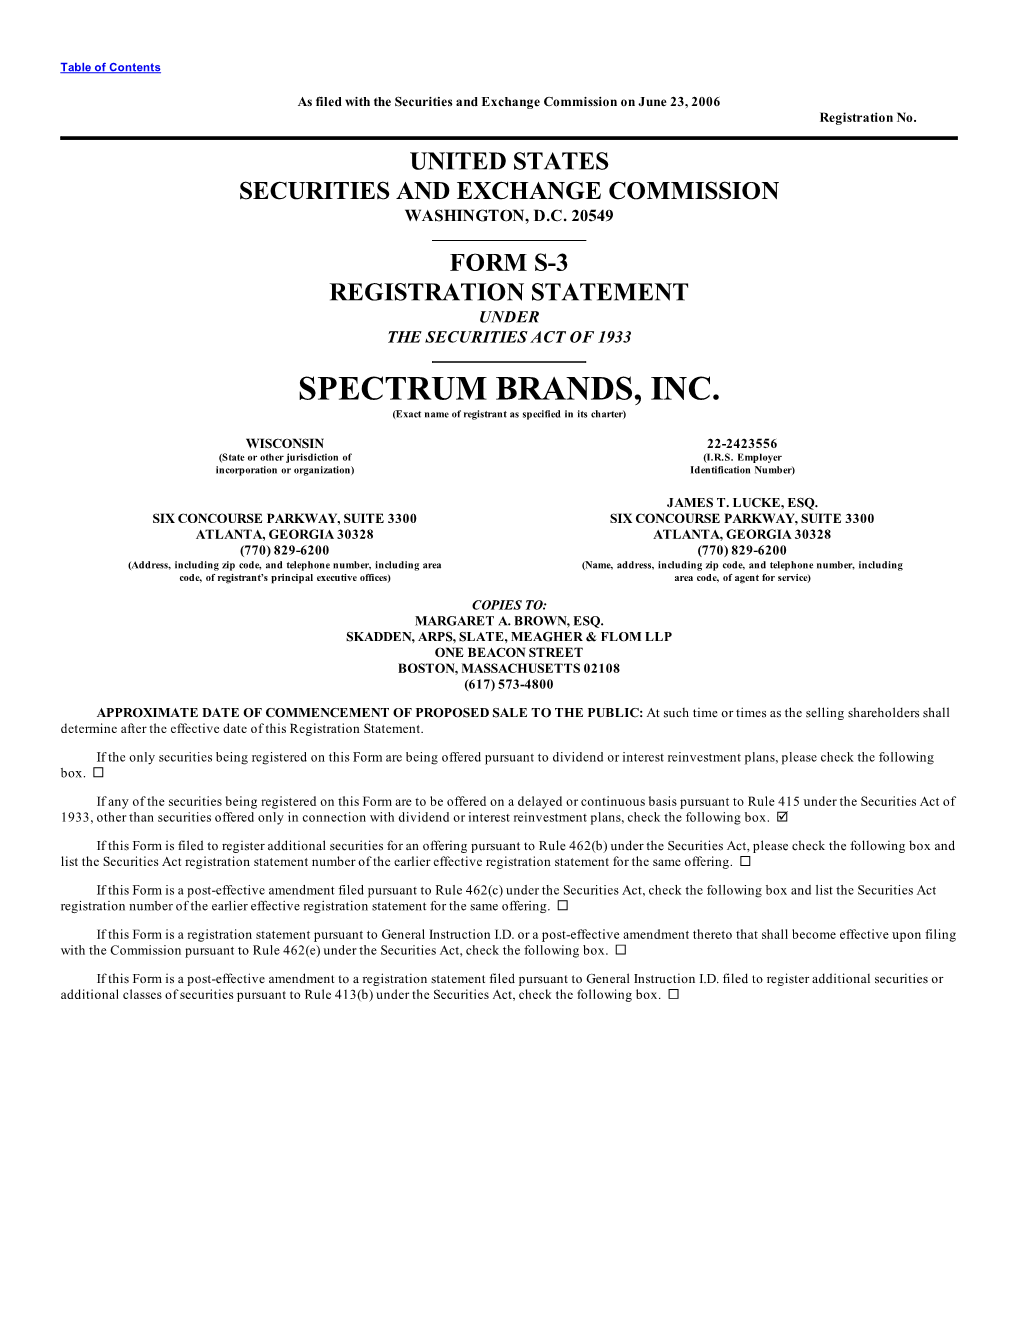 SPECTRUM BRANDS, INC. (Exact Name of Registrant As Specified in Its Charter)